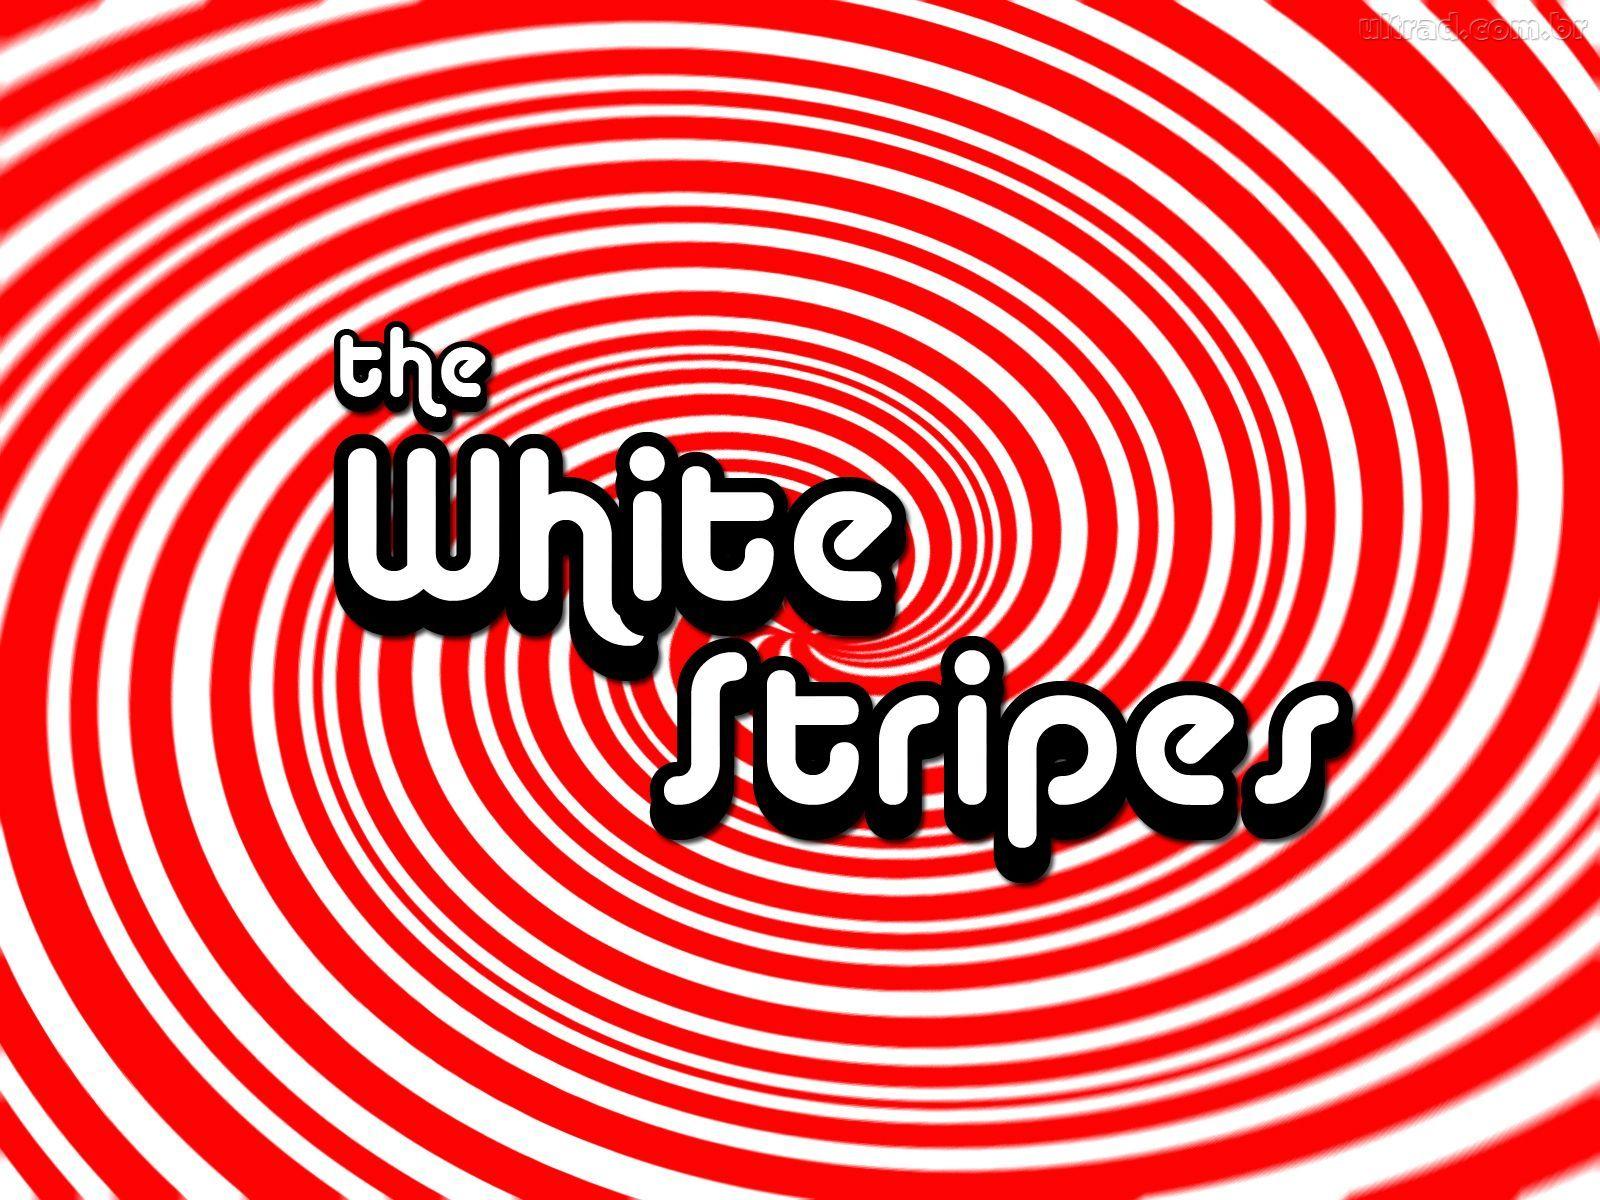 Red and White Stripes Logo - The White Stripes Wallpaper Image Group (38+)